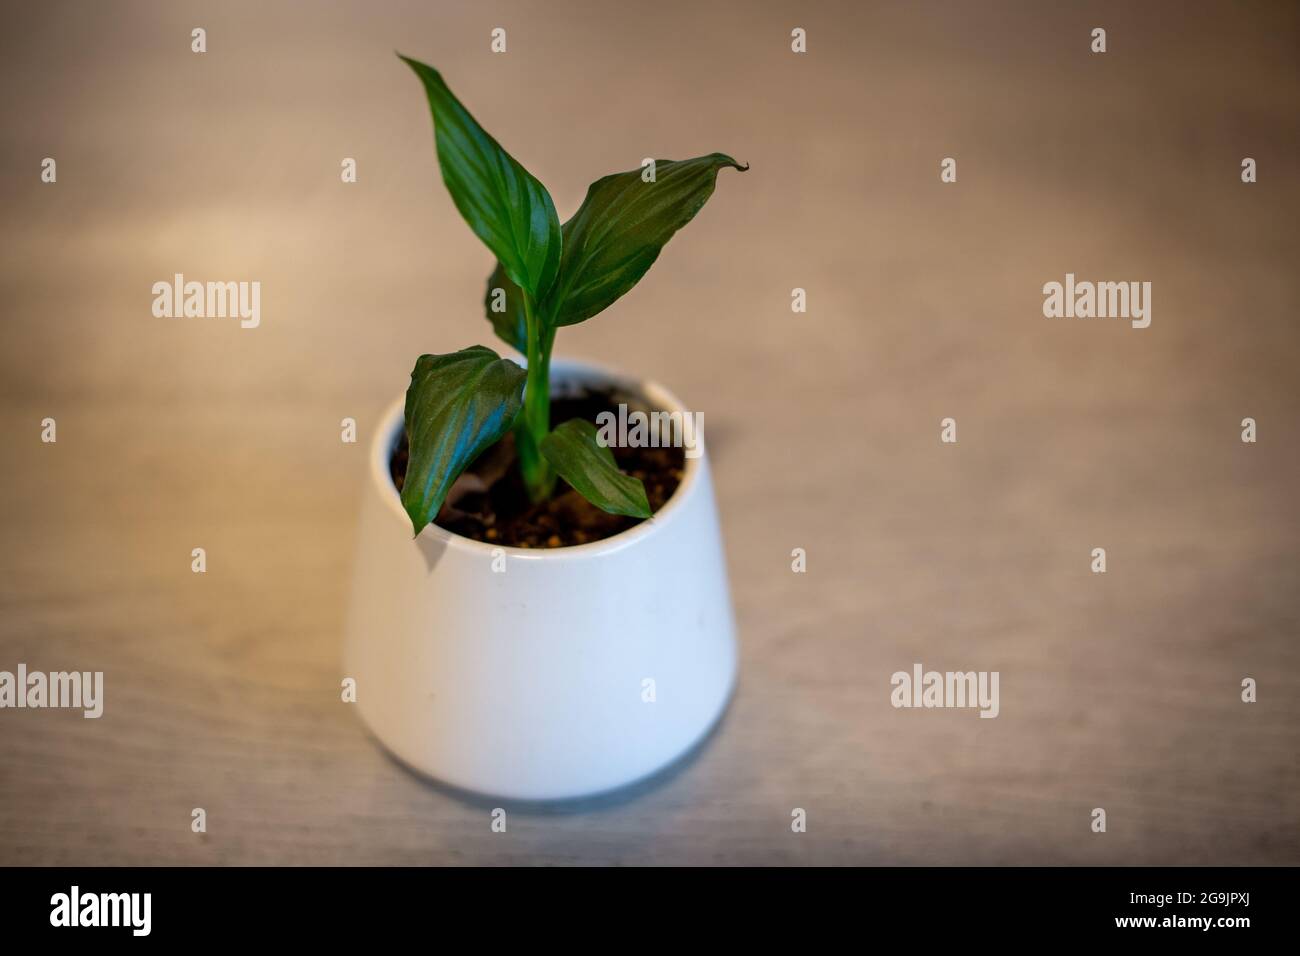 A baby spathiphyllum, or peace lily, growing in a white pot and will be an ideal house plant with white flowers Stock Photo